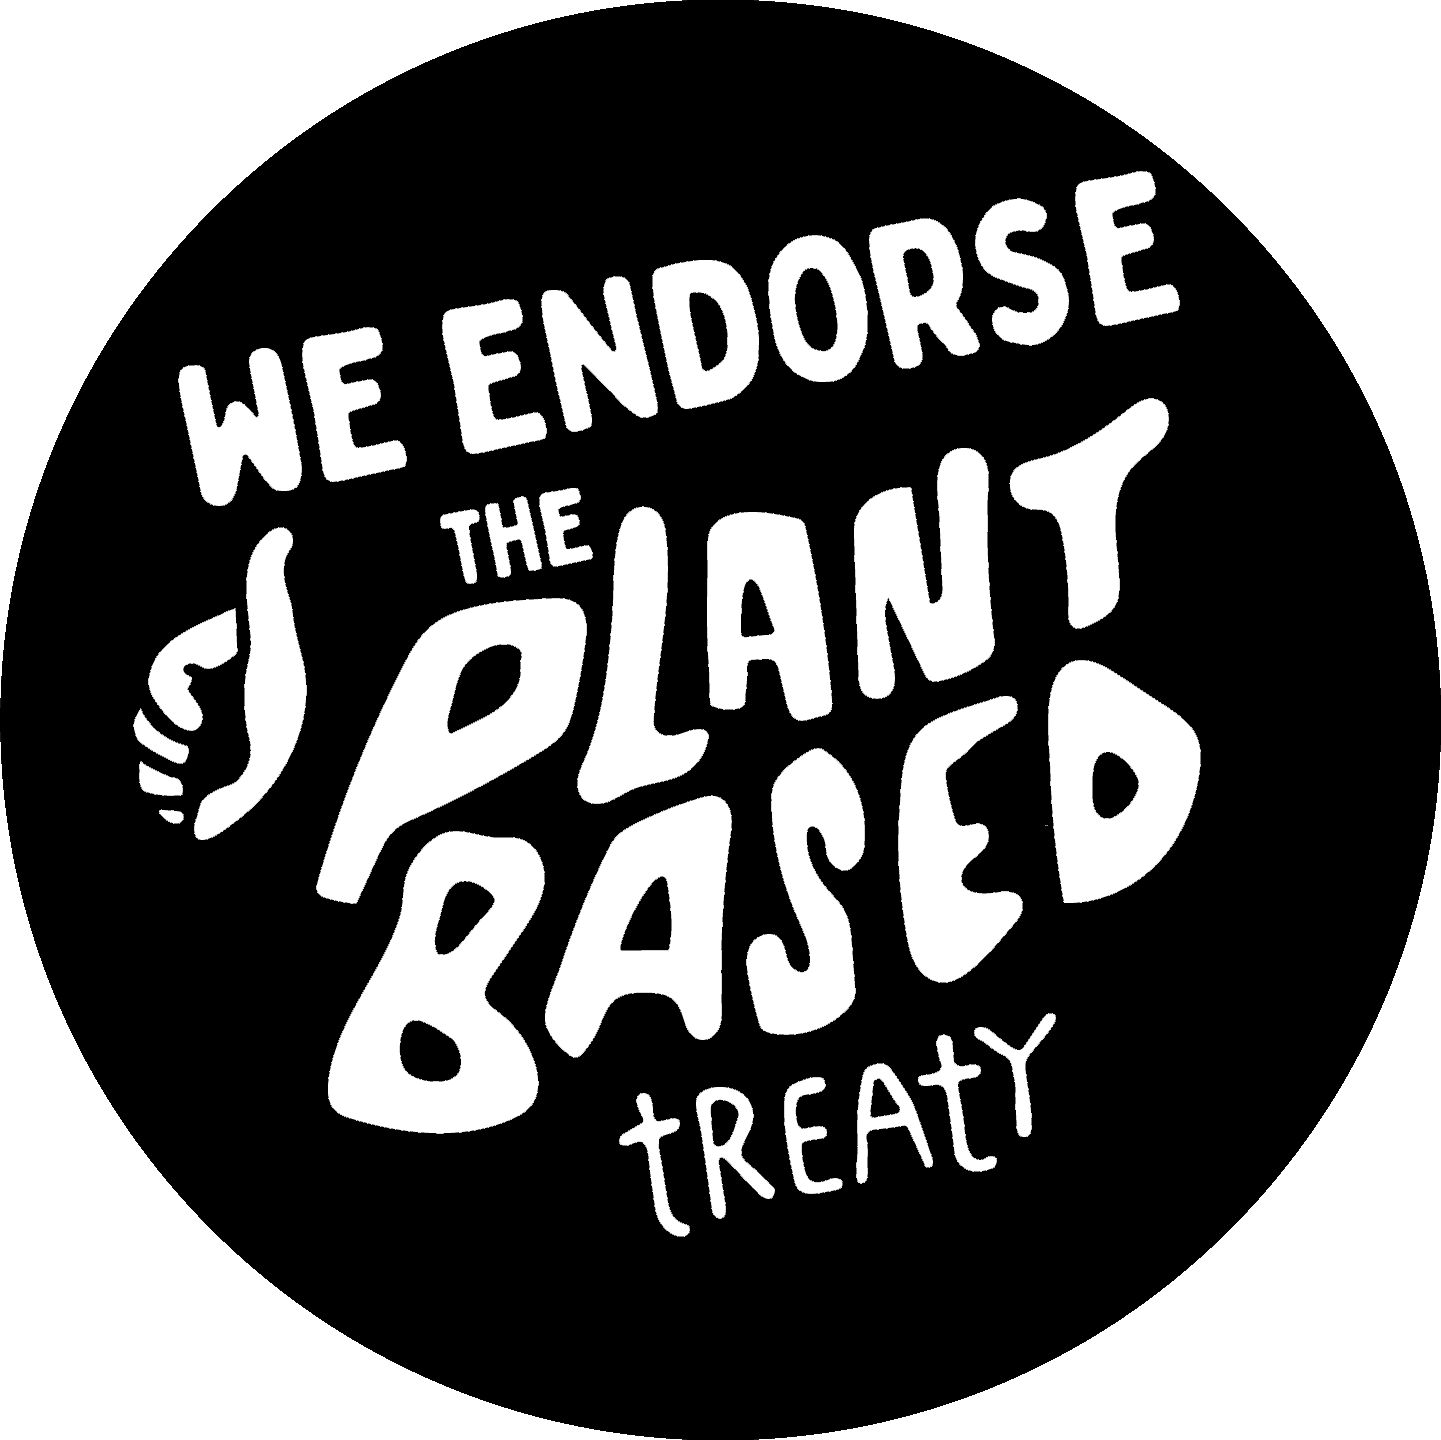 SUPPORT: THE PLANTBASED TREATY